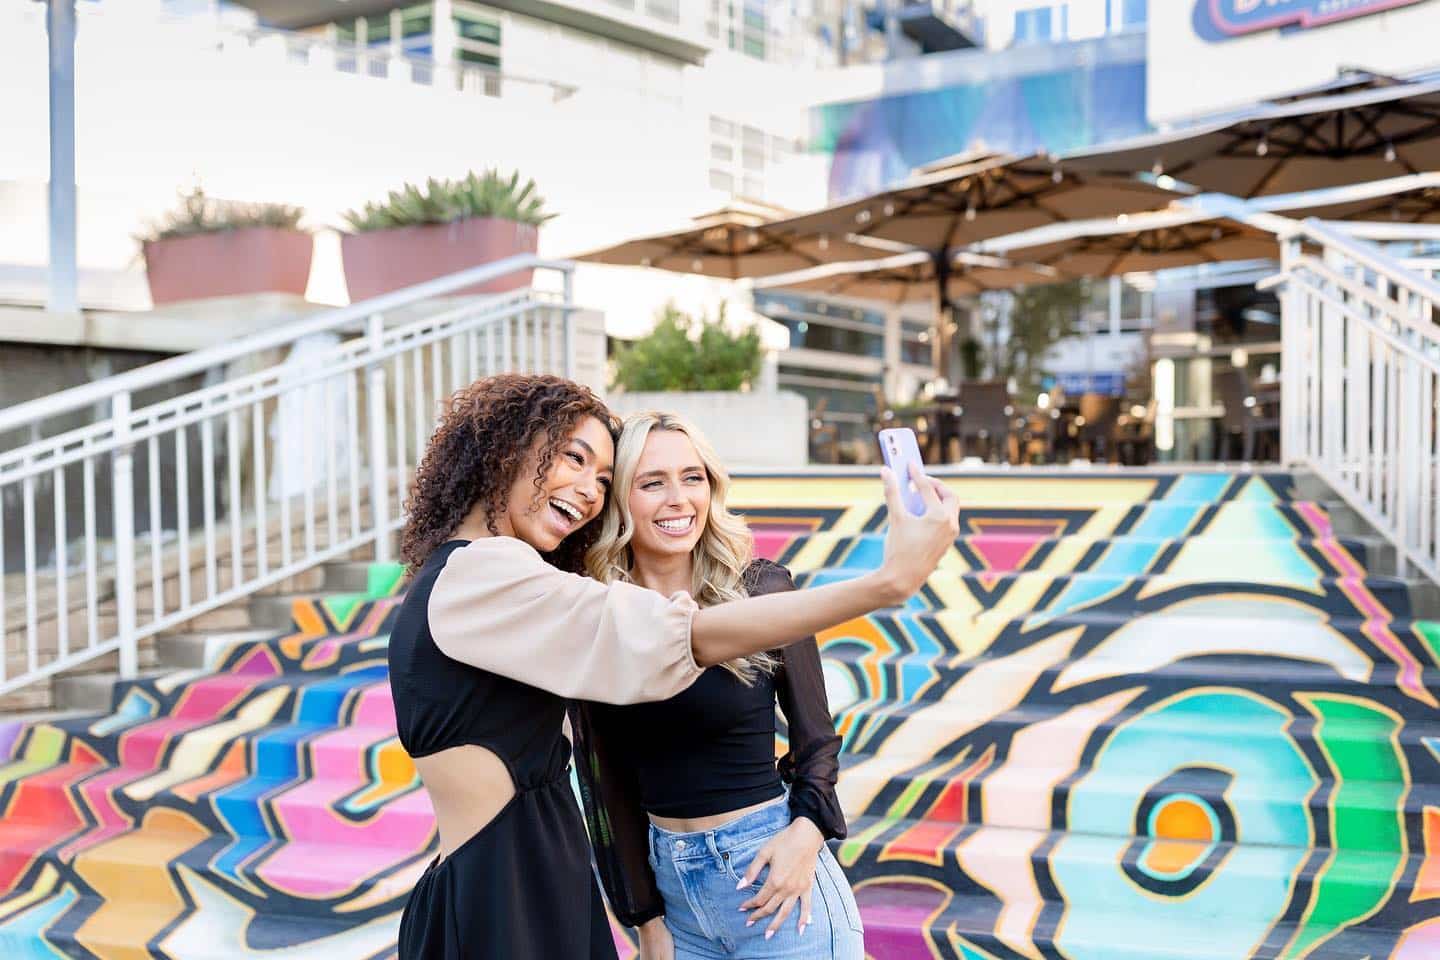 Happy National Best Friend Day! ⁣⁣⁣⁣
⁣⁣⁣⁣
 GIVEAWAY! We’re giving you AND your bestie a $50 gift card to any shop or restaurant at Metropolitan! (Valued at $100)⁣⁣⁣⁣
⁣⁣⁣⁣
TO ENTER: ⁣⁣⁣⁣
🏻 Visit our website - linked in bio ⁣⁣⁣⁣
🏻 Scroll to the bottom of the page⁣⁣⁣⁣
🏻 Enter your first name and last name⁣⁣⁣⁣
🏻 Enter your email address⁣⁣⁣⁣
🏻 Click “Sign Up”⁣⁣⁣⁣
⁣⁣⁣⁣
Winner will be contacted Friday at noon. One winner will be chosen at random. Per Instagram rules, this promotion is in no way sponsored, administered, or associated with Instagram, Inc.